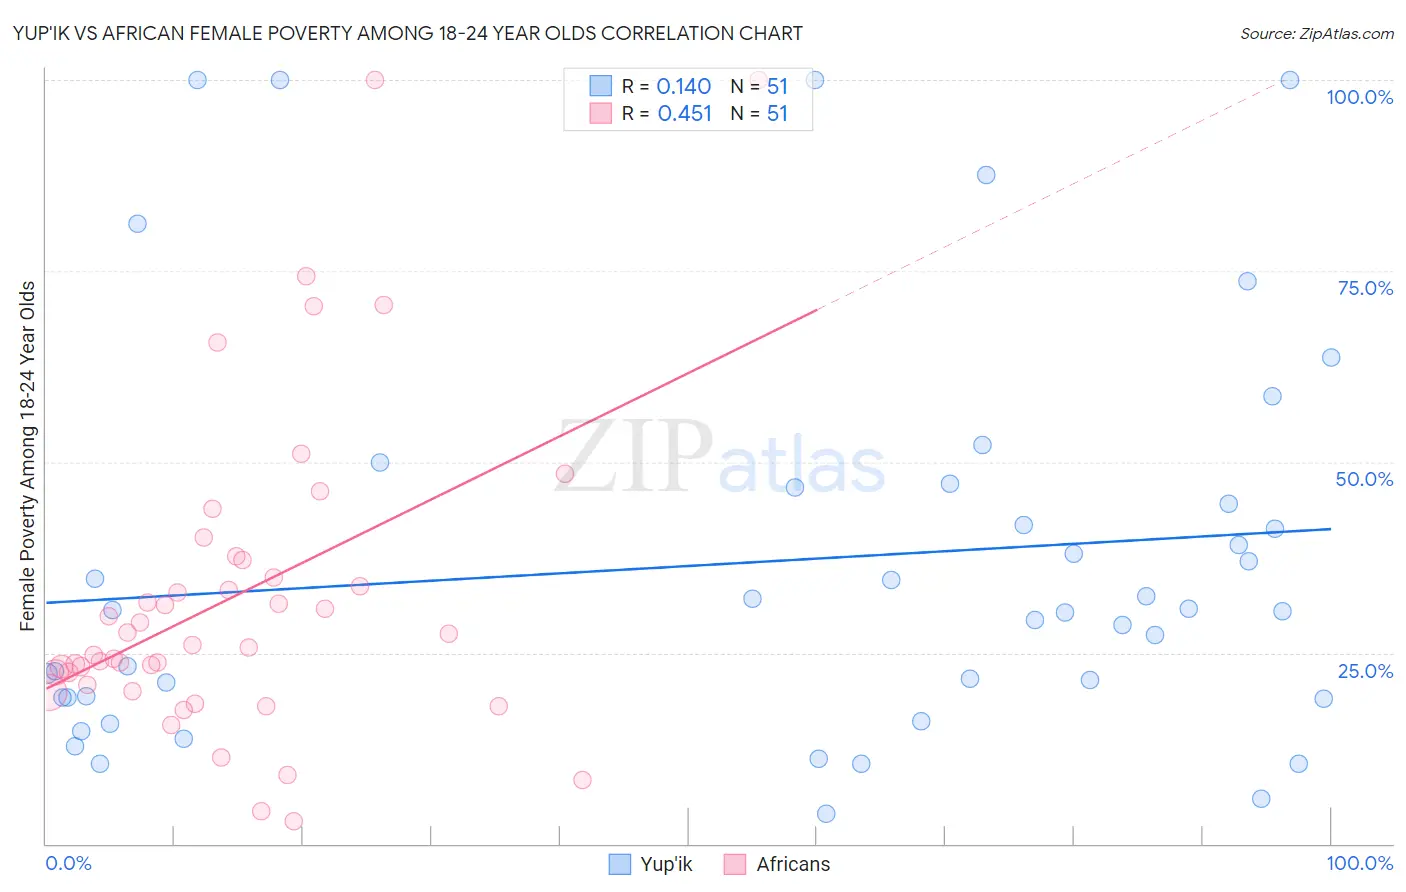 Yup'ik vs African Female Poverty Among 18-24 Year Olds